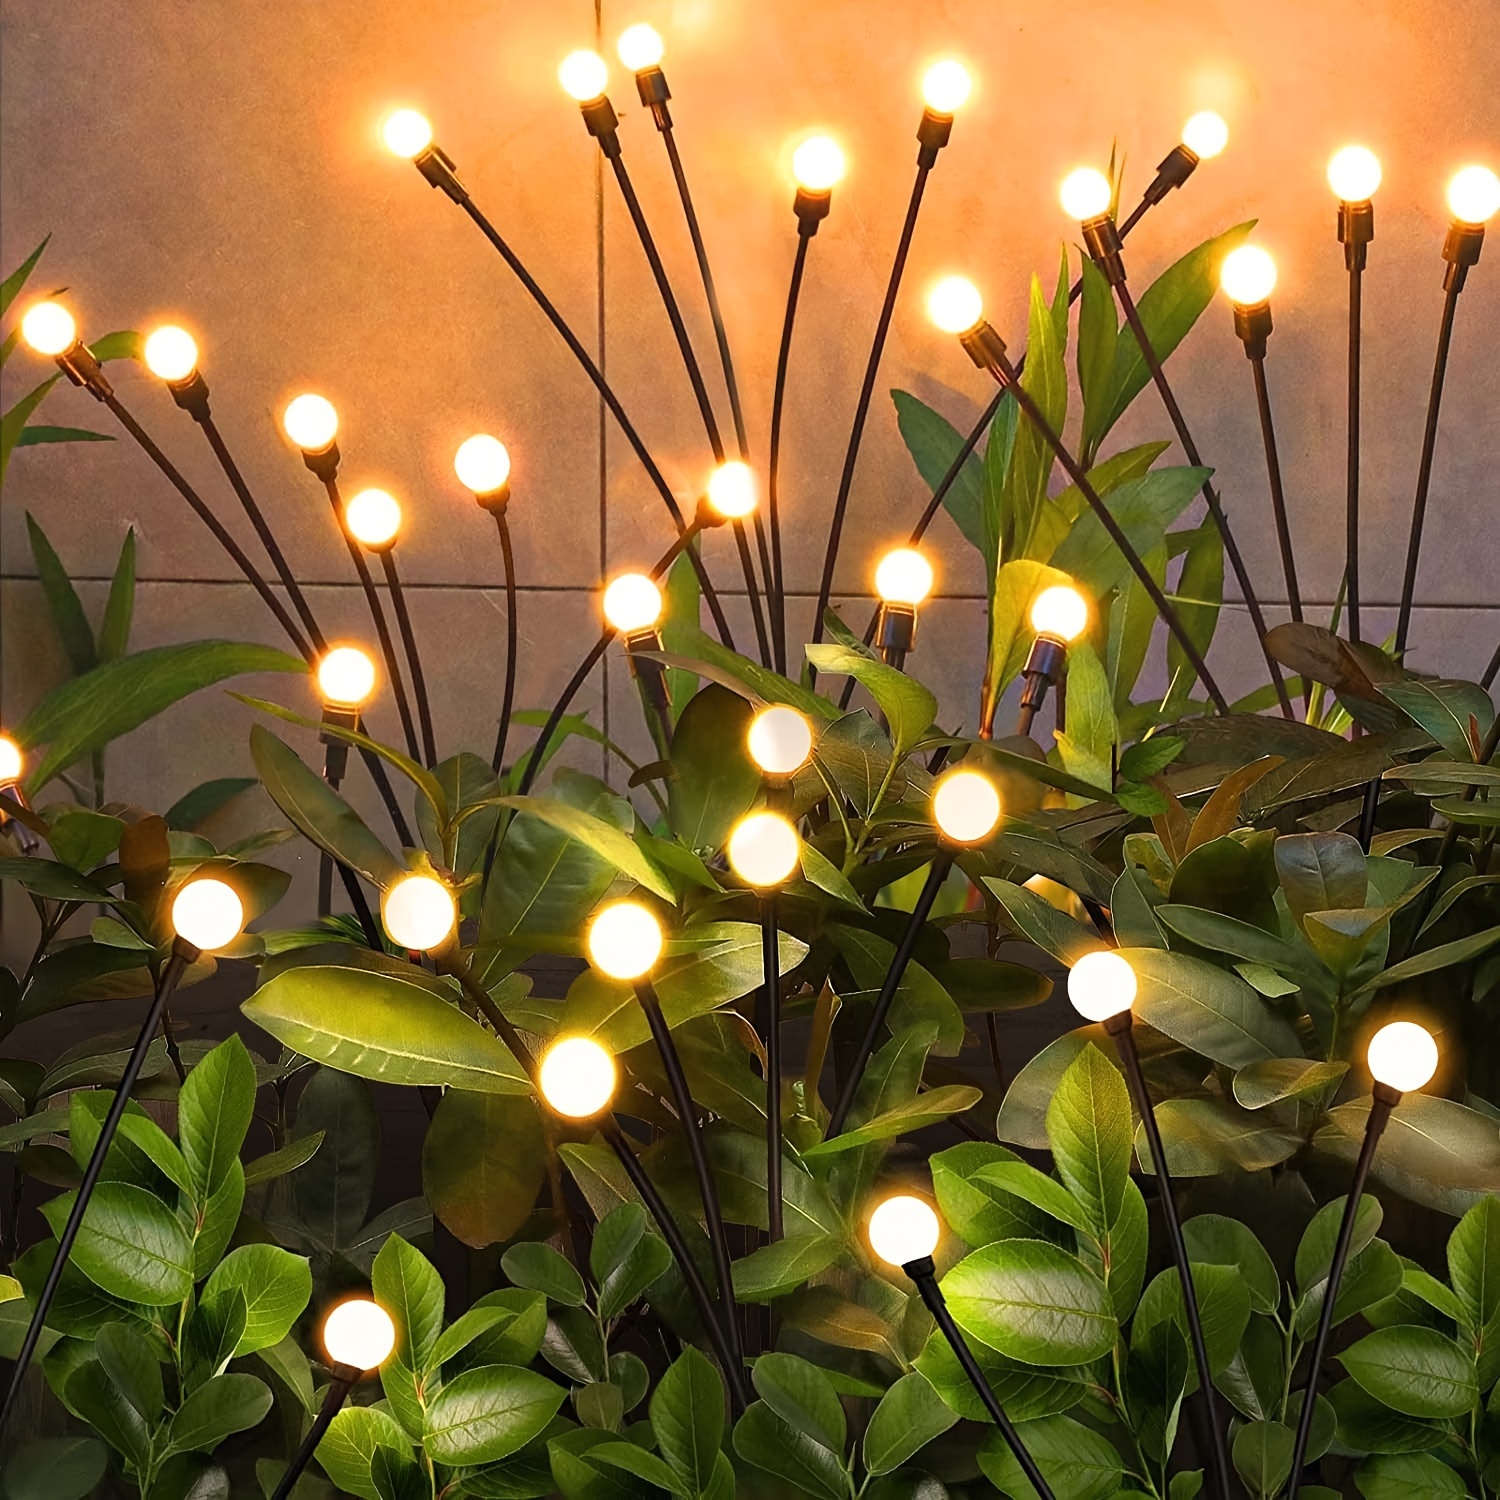 

Solar Firefly Lights, Starburst Swaying Lights, Outdoor Garden Decorations For Yard Patio Pathway Lawn, Gardening Gifts For Women Mother's Day